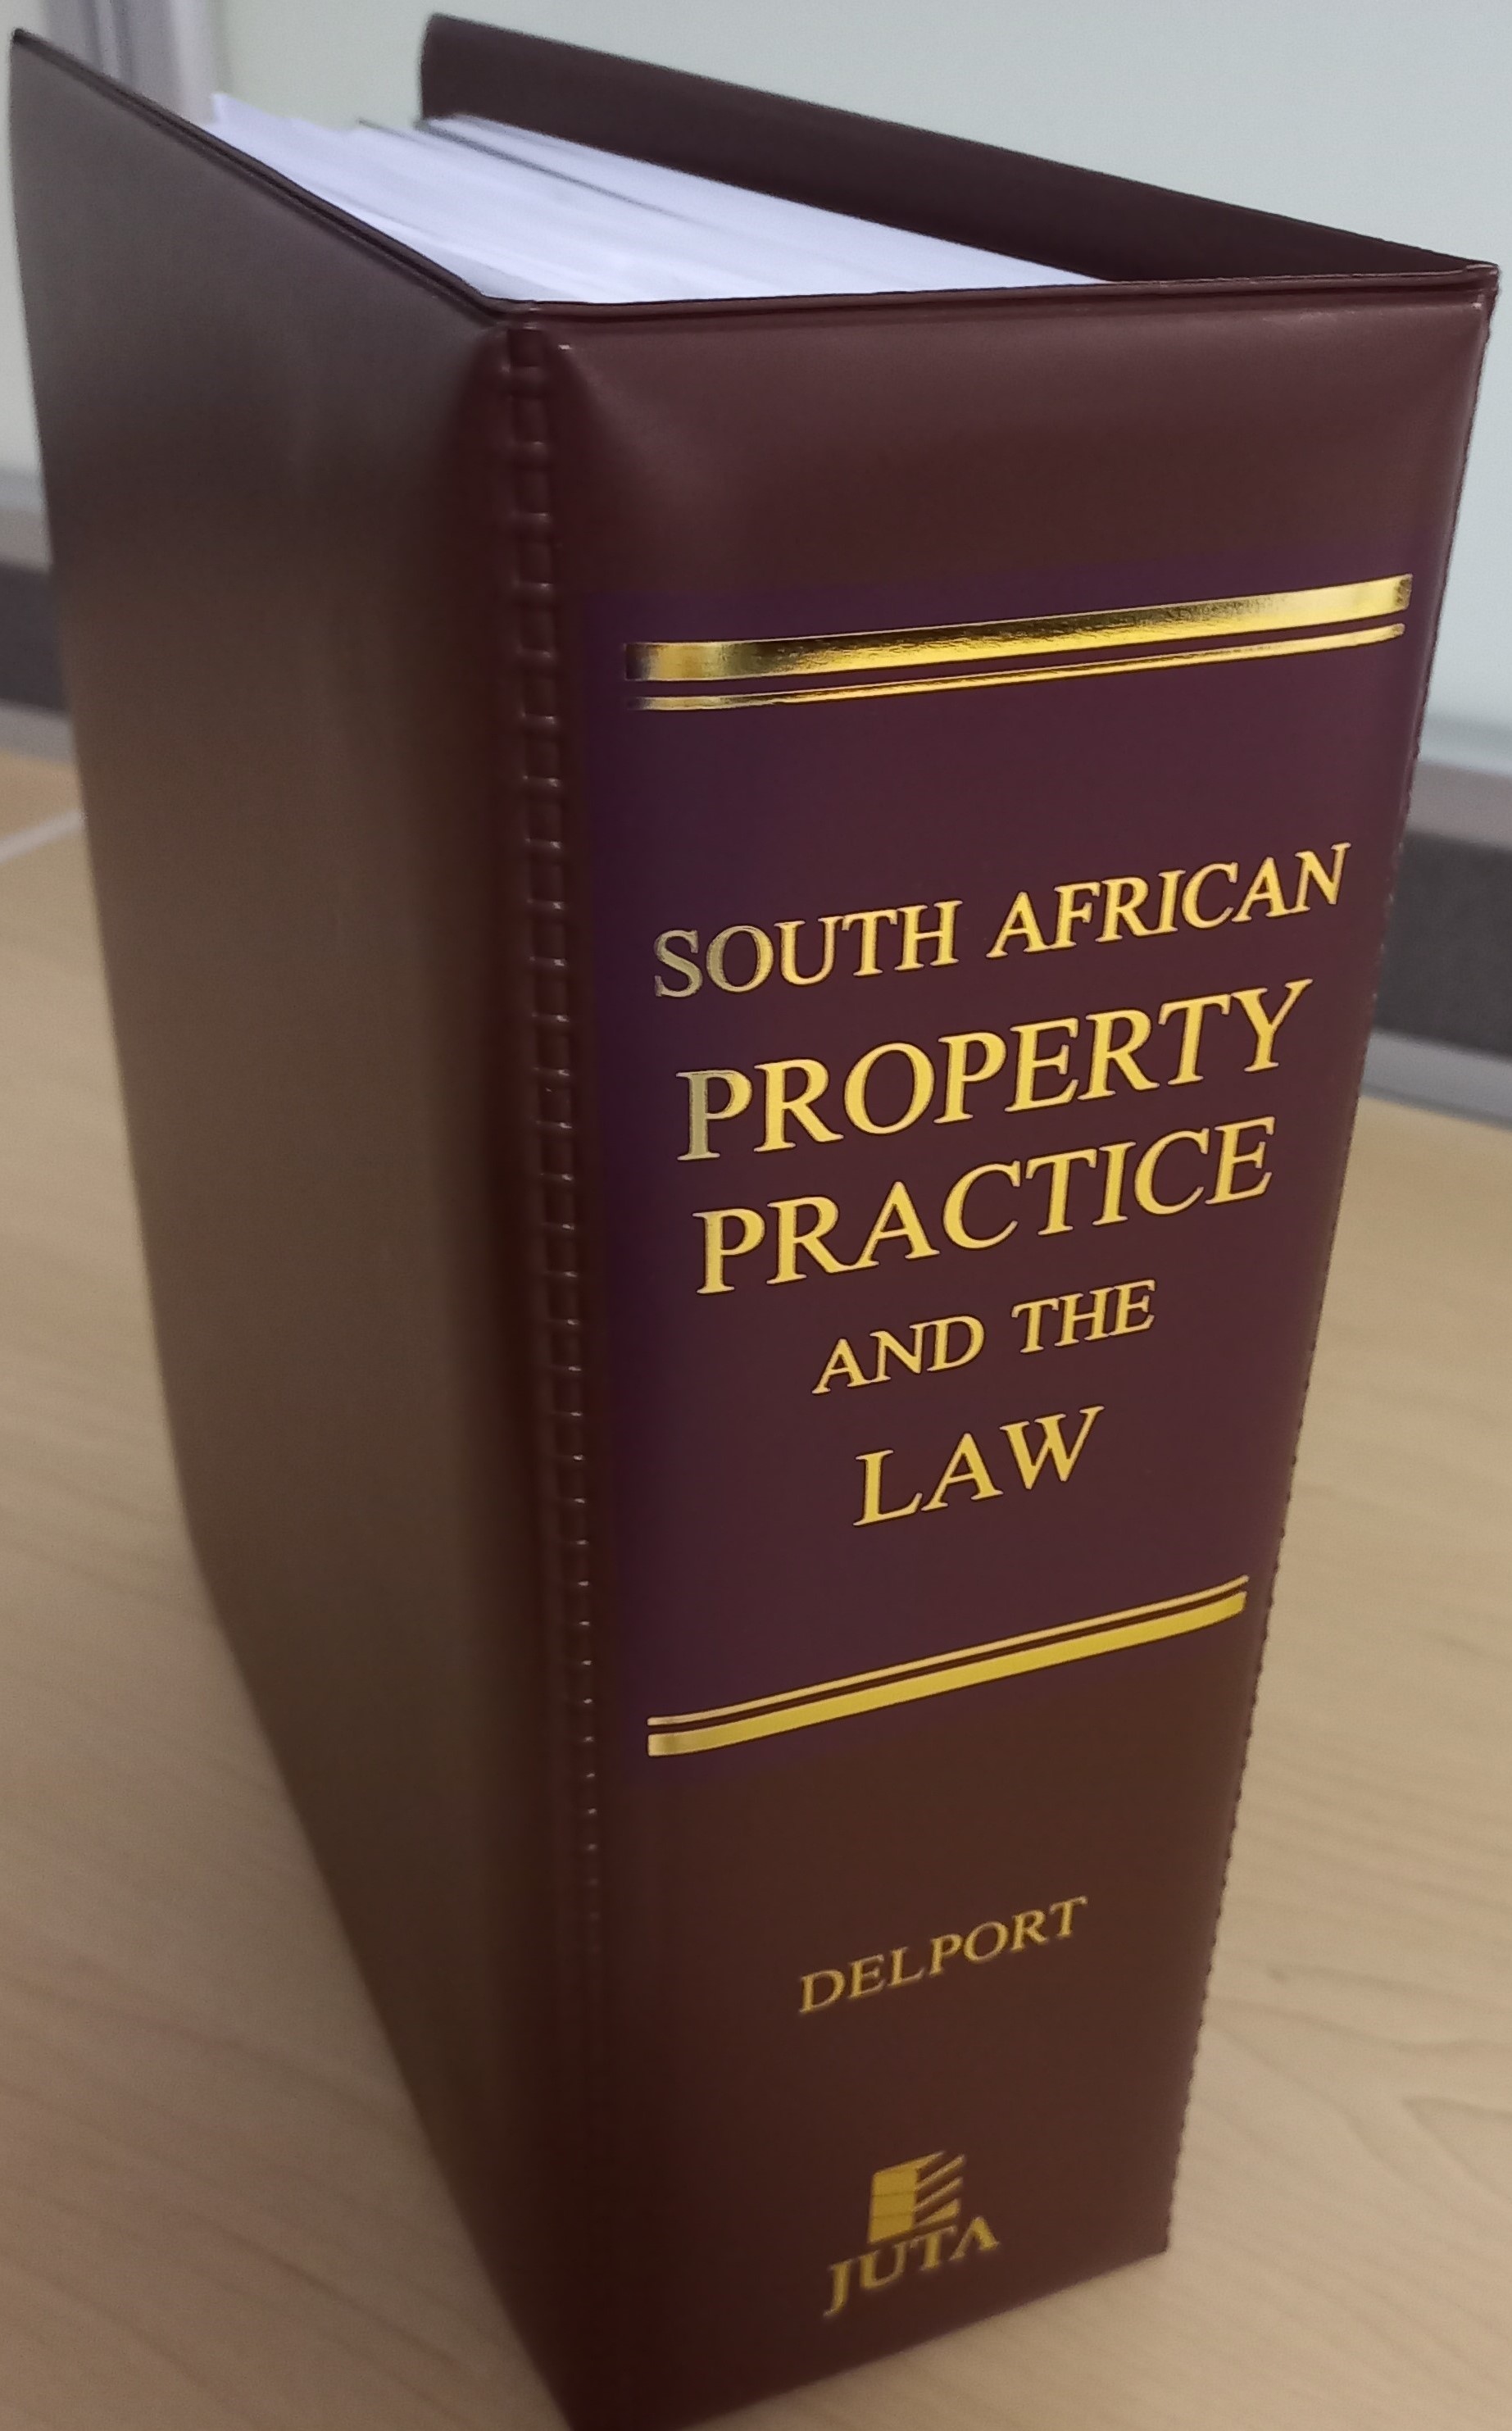 South African Property Practice and the Law: A Practical Manual for Property Practitioners